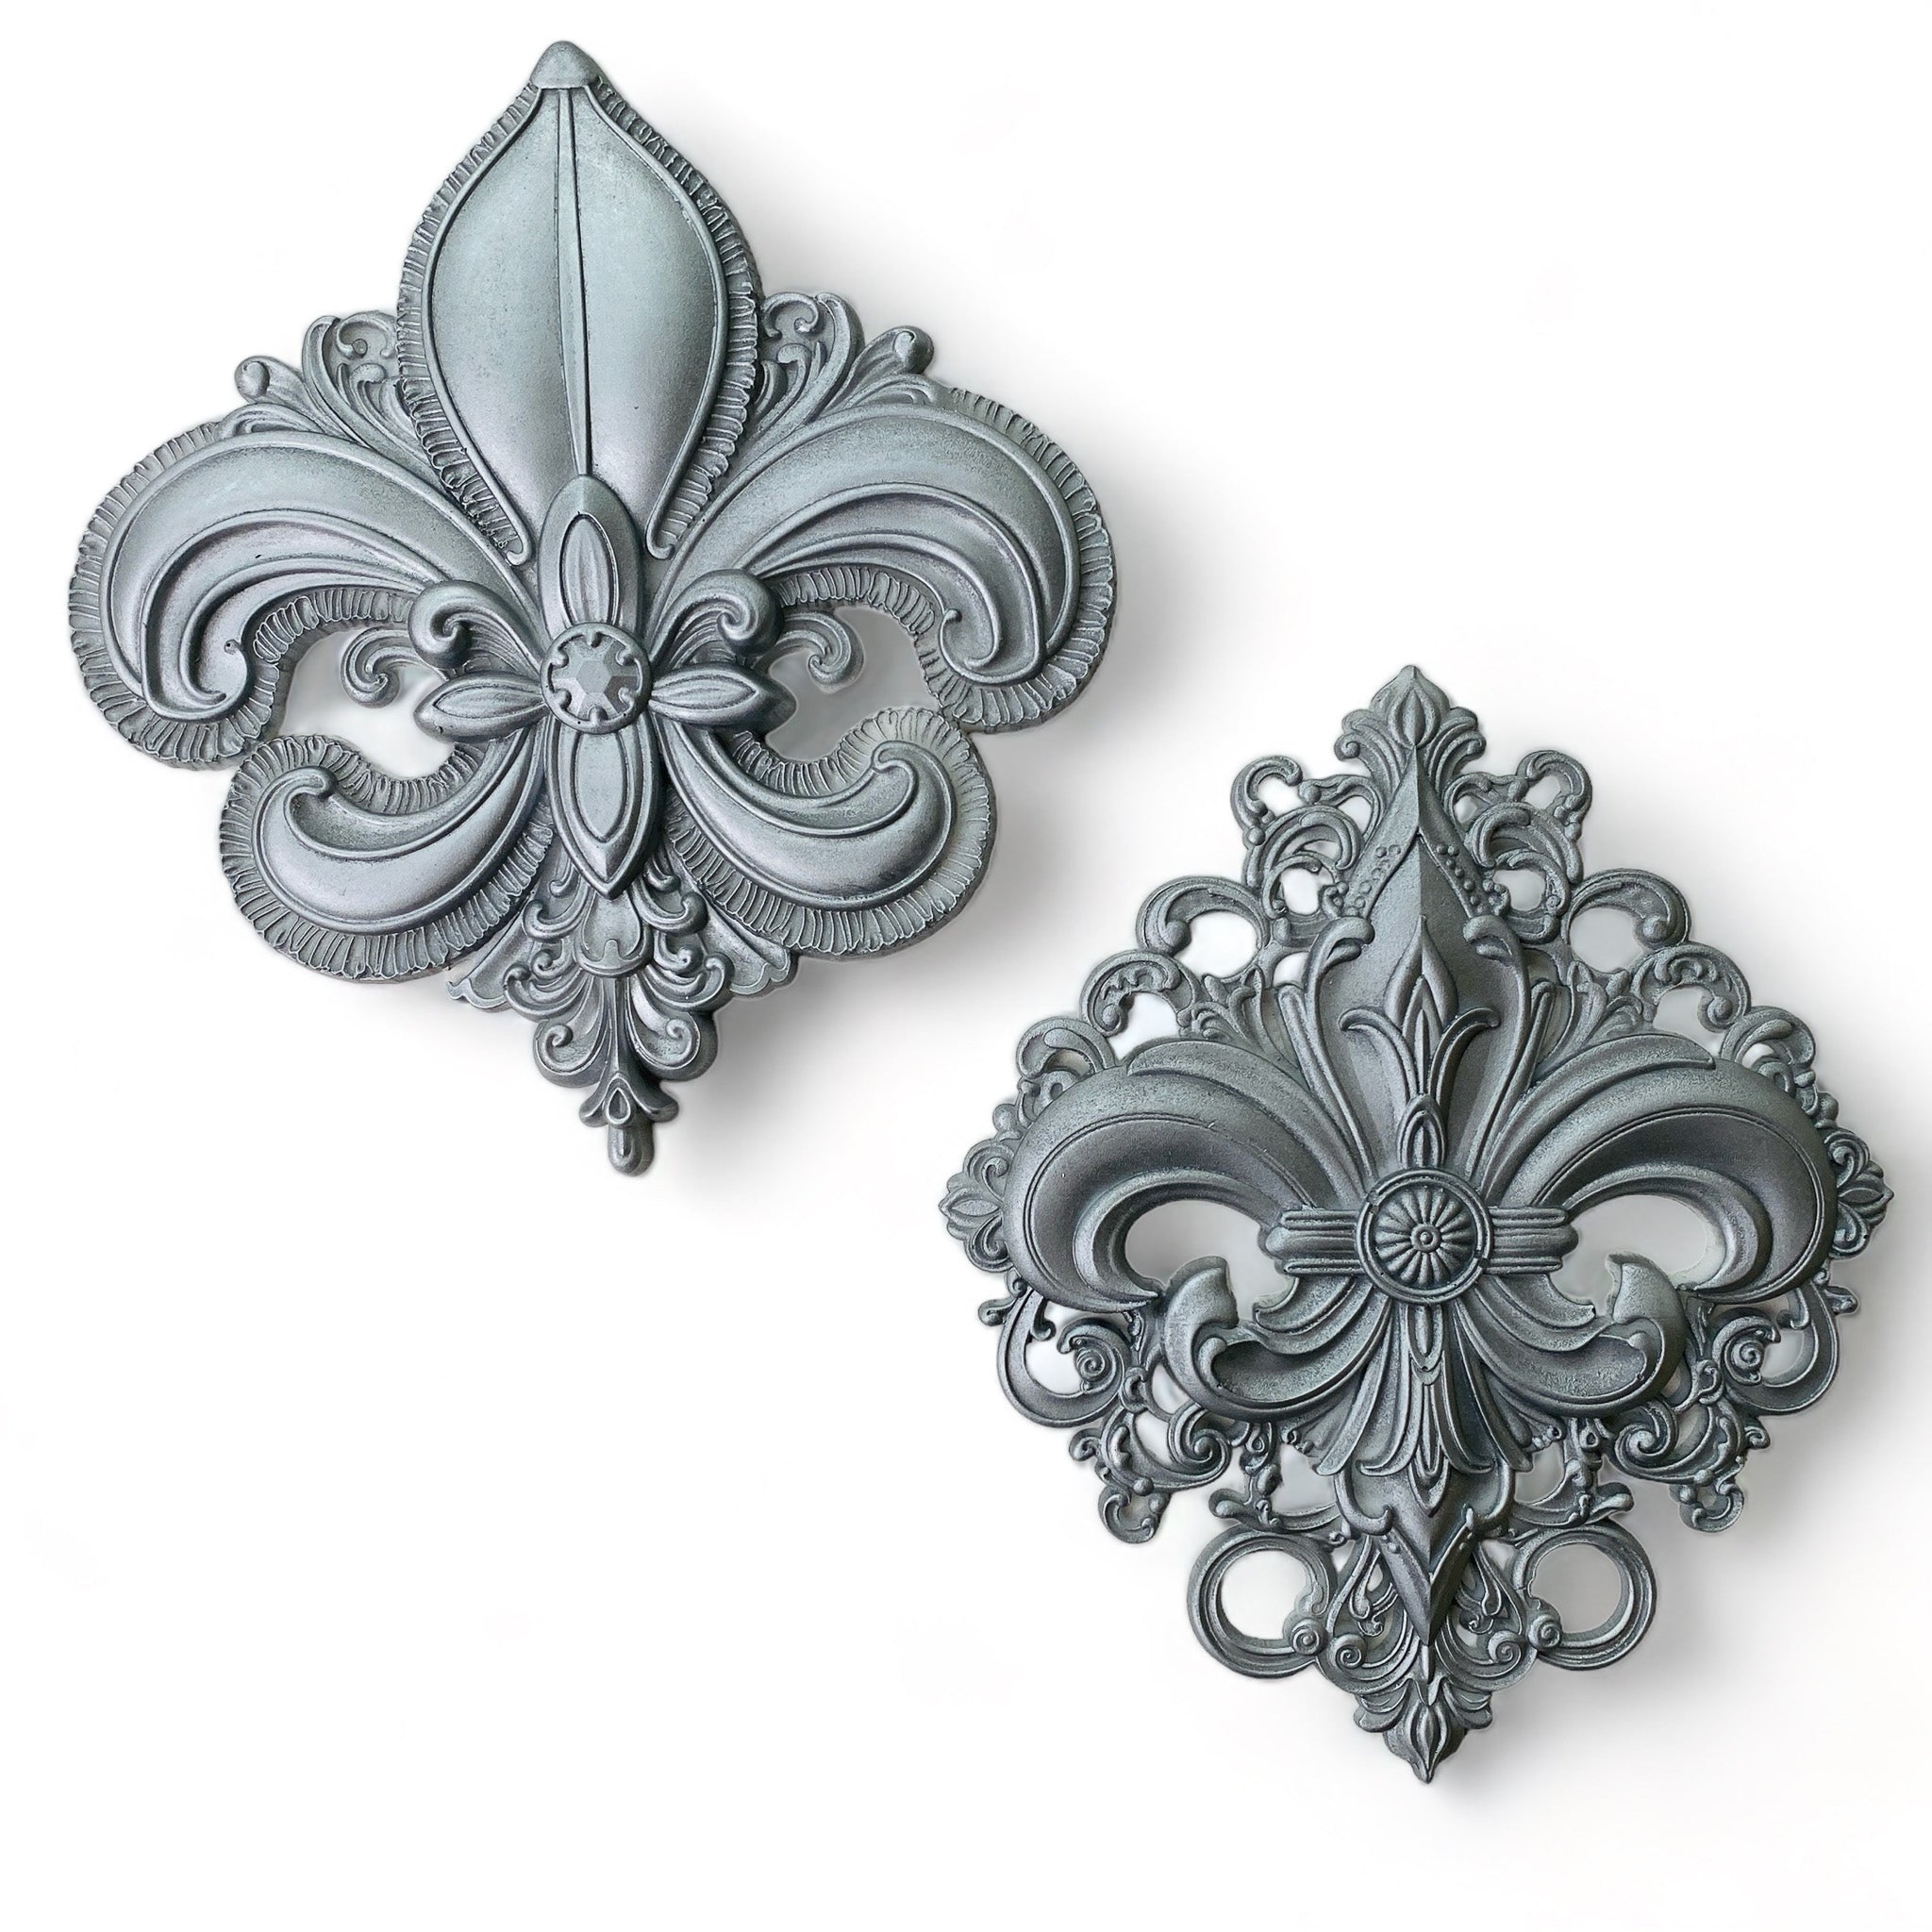 Silver-colored silicone mold castings of 2 large ornate Fleur de Lis designs are against a white background.